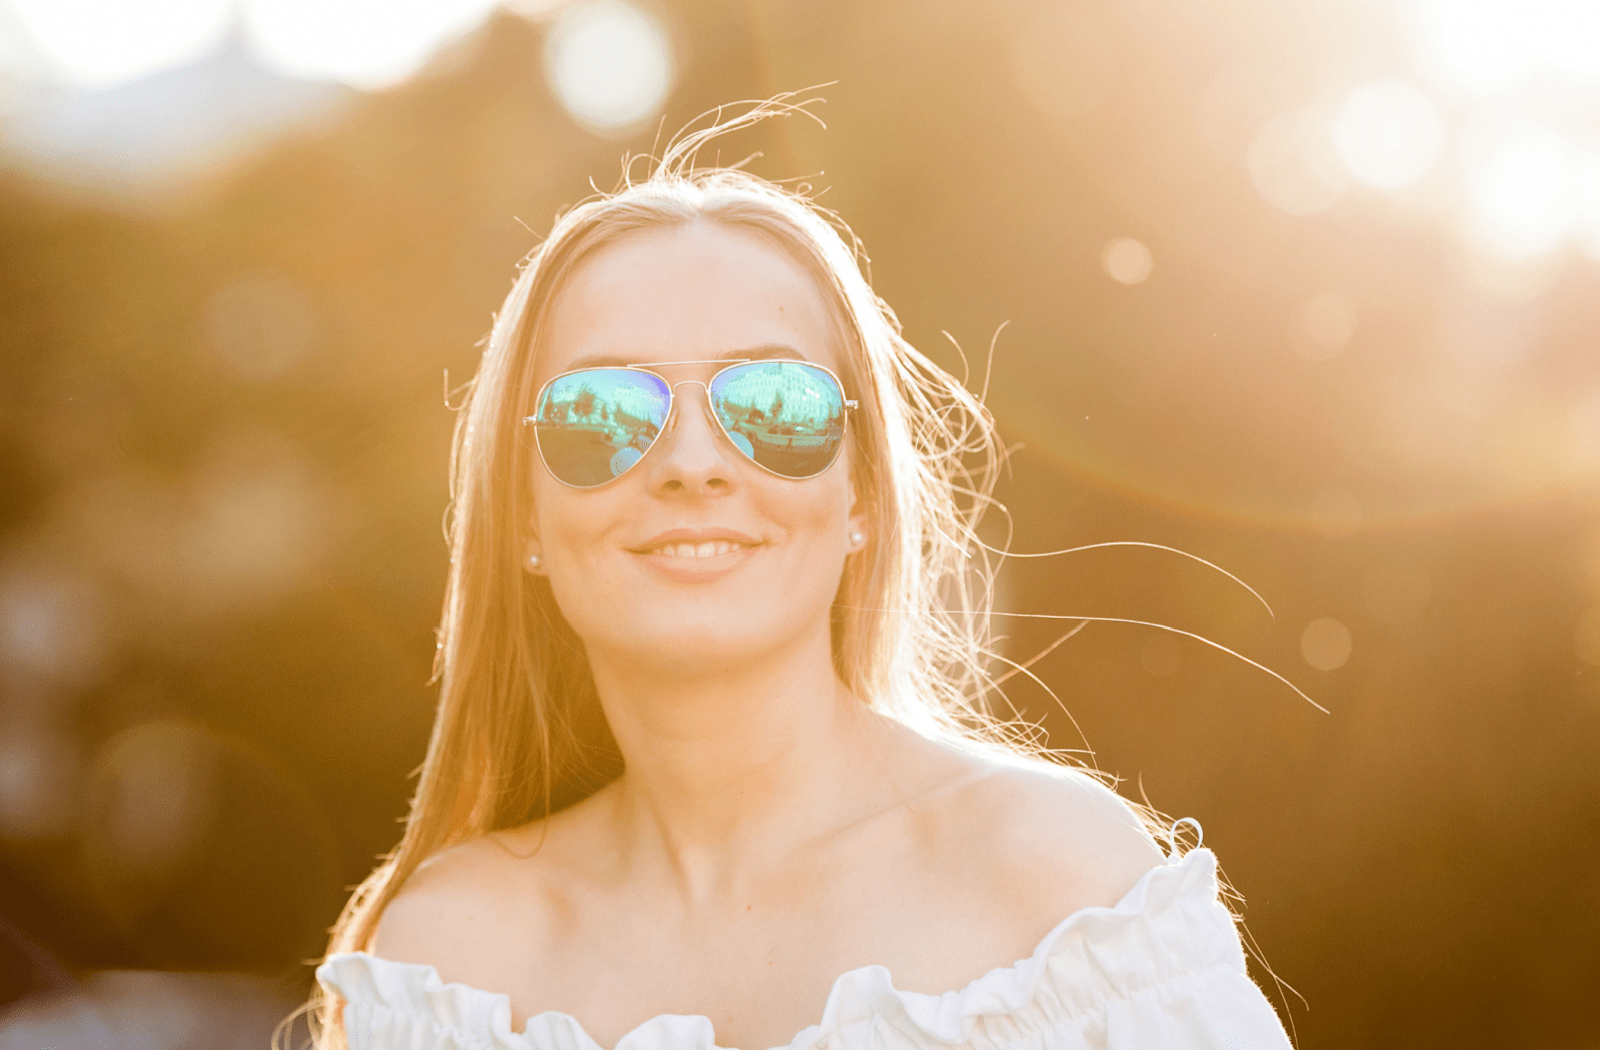 A young woman standing outside in the sunlight, wearing polarized sunglasses to protect her vision.